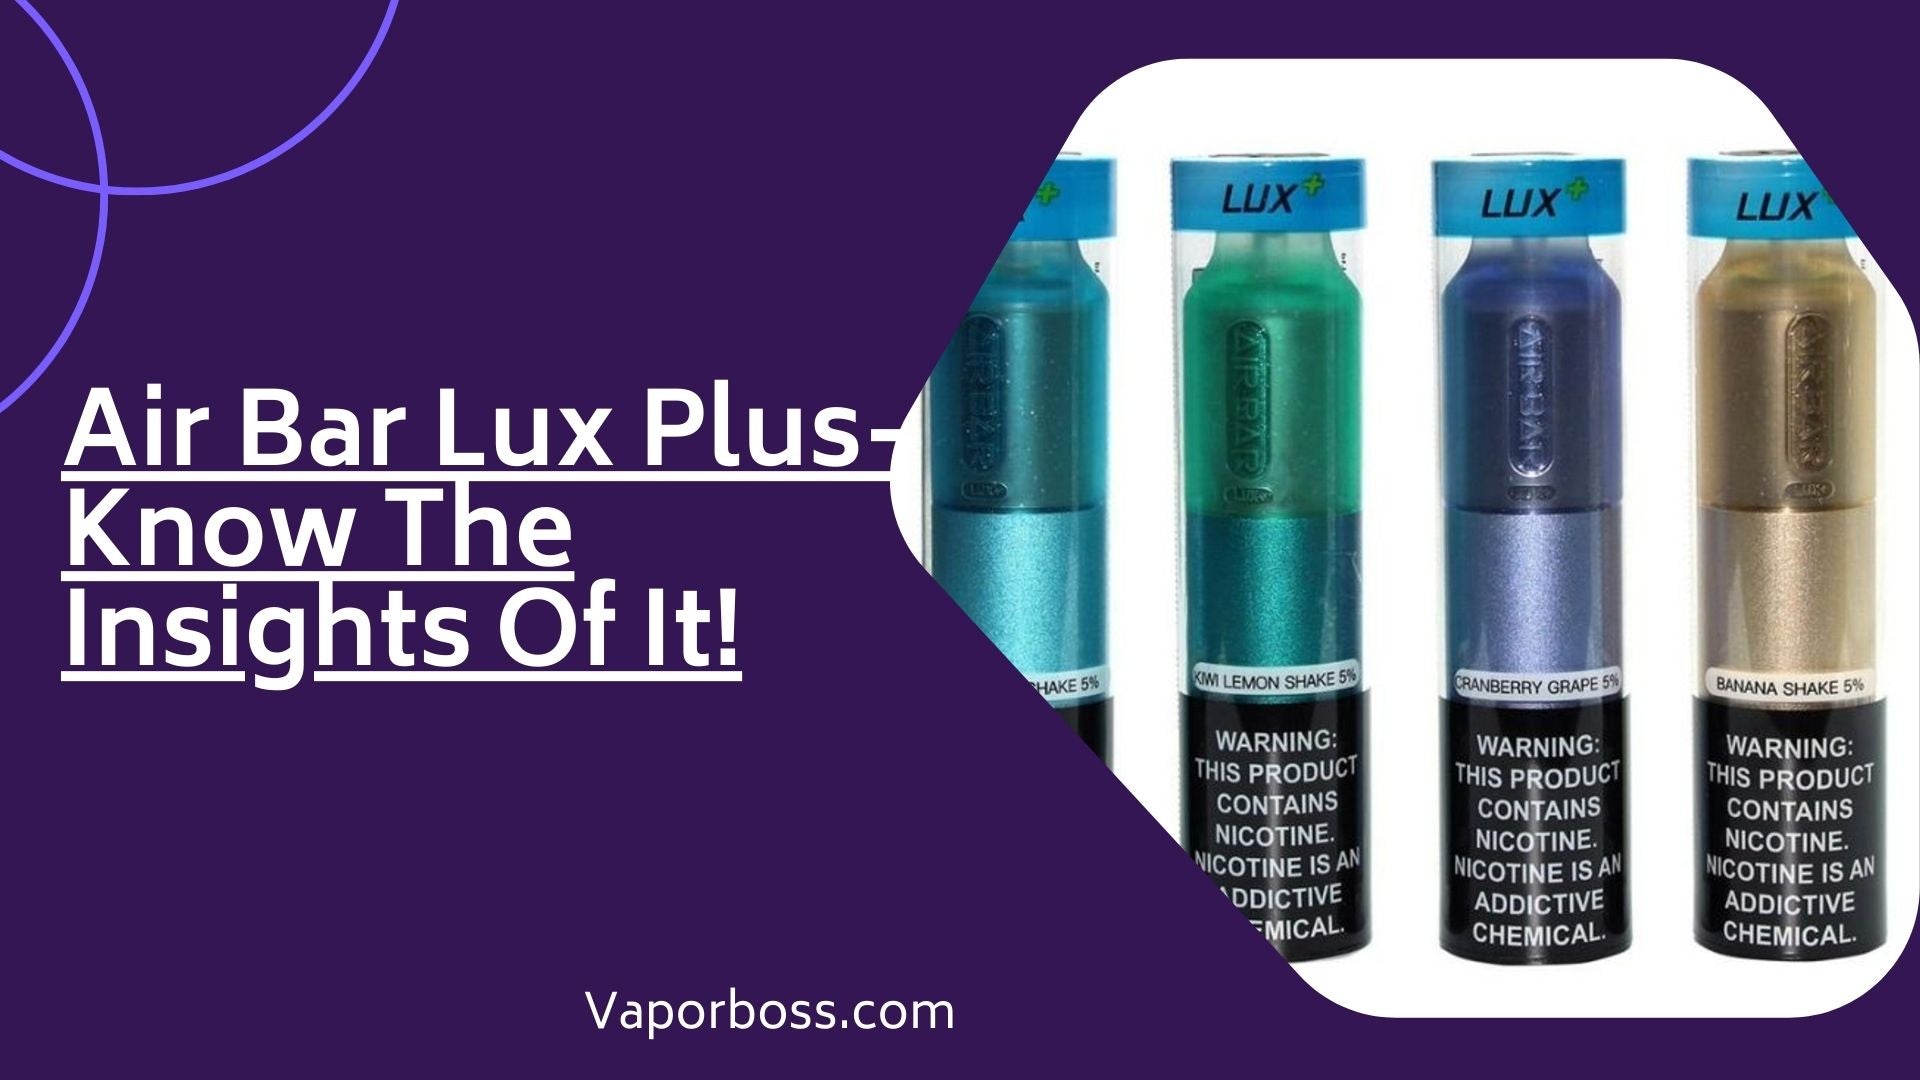 Air Bar Lux Plus- Know The Insights Of It!